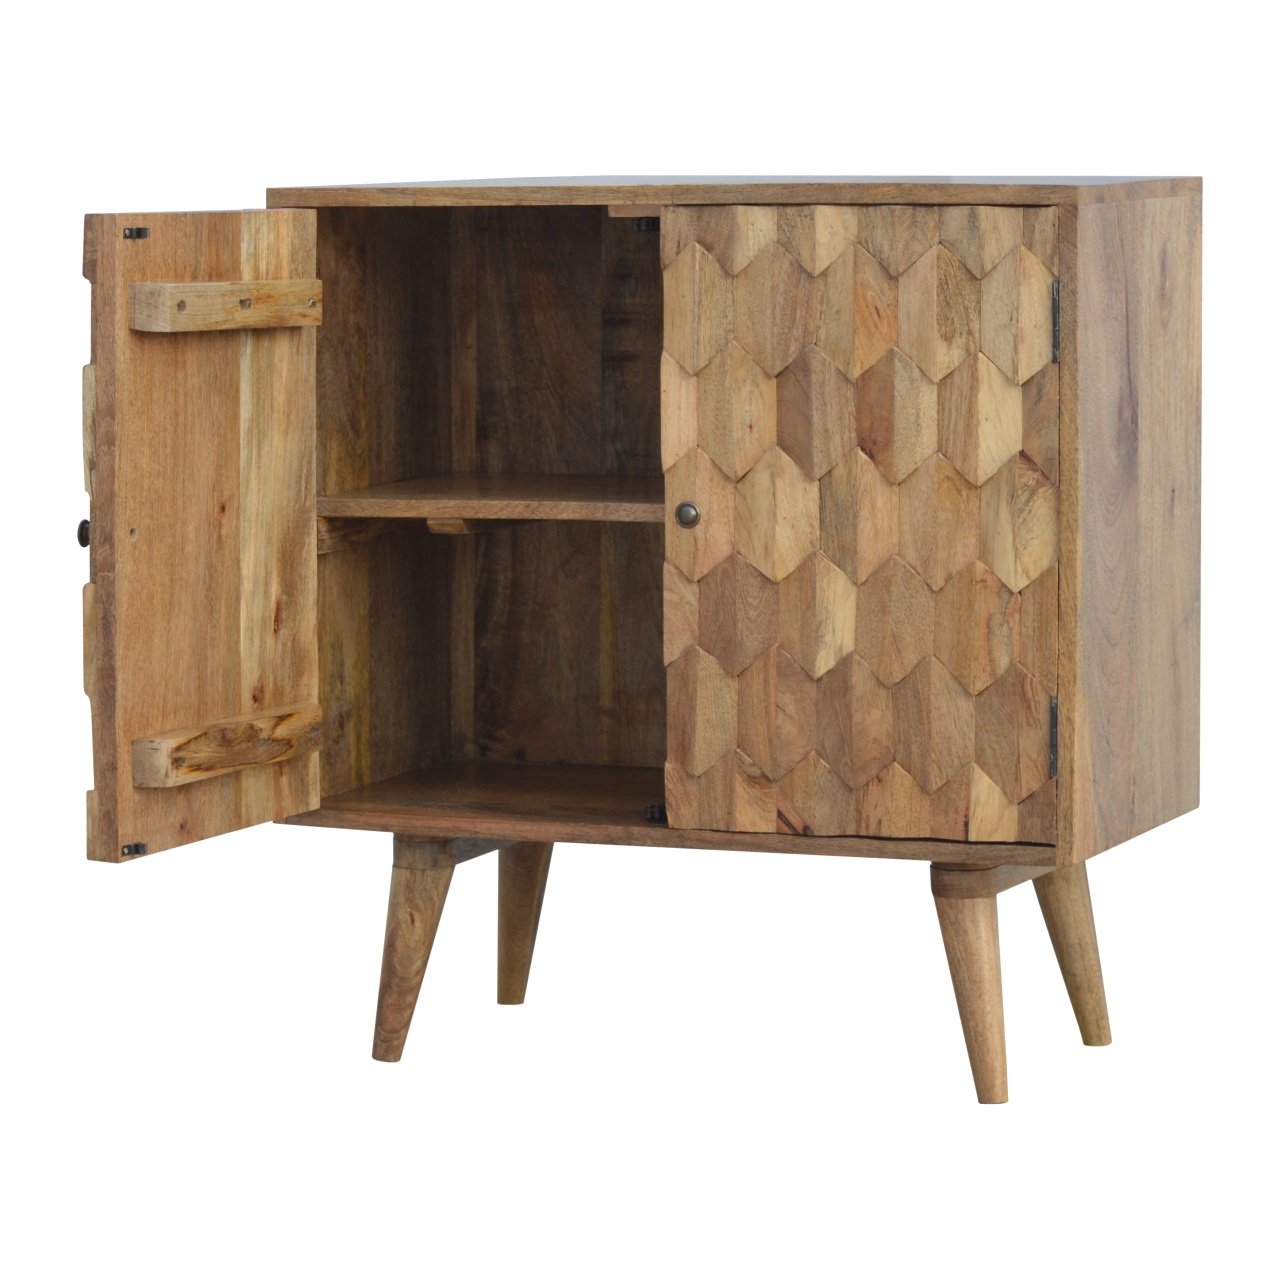 Pineapple Carved Cabinet Solid Wood In Oak Finish